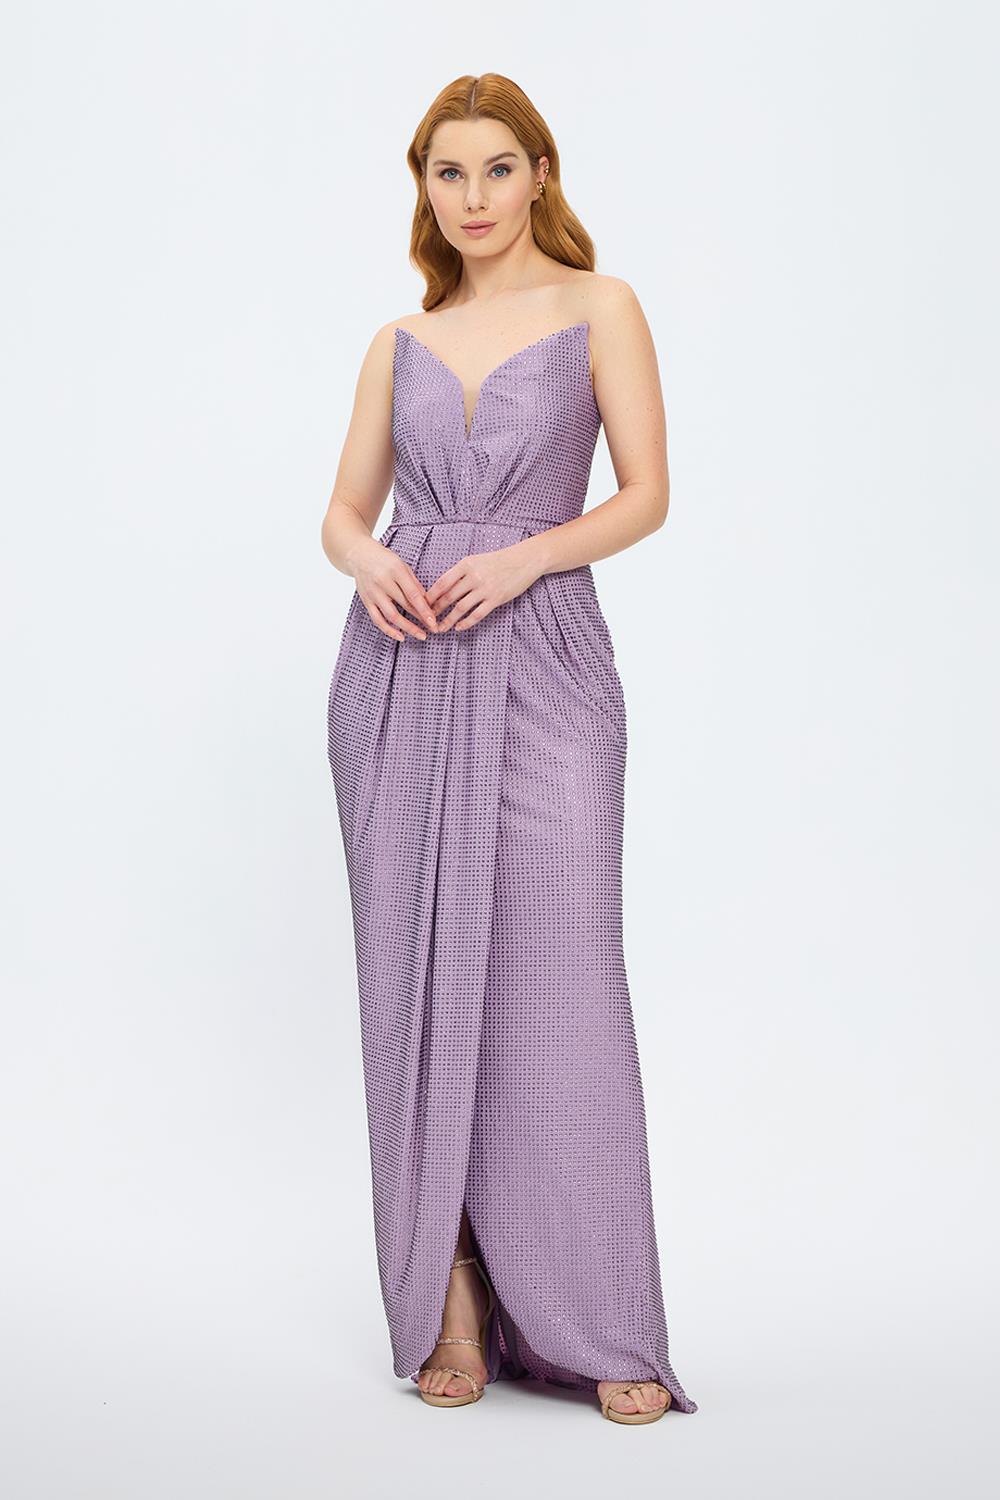 Dragee Collar Stone Embroidered Long Evening Dress